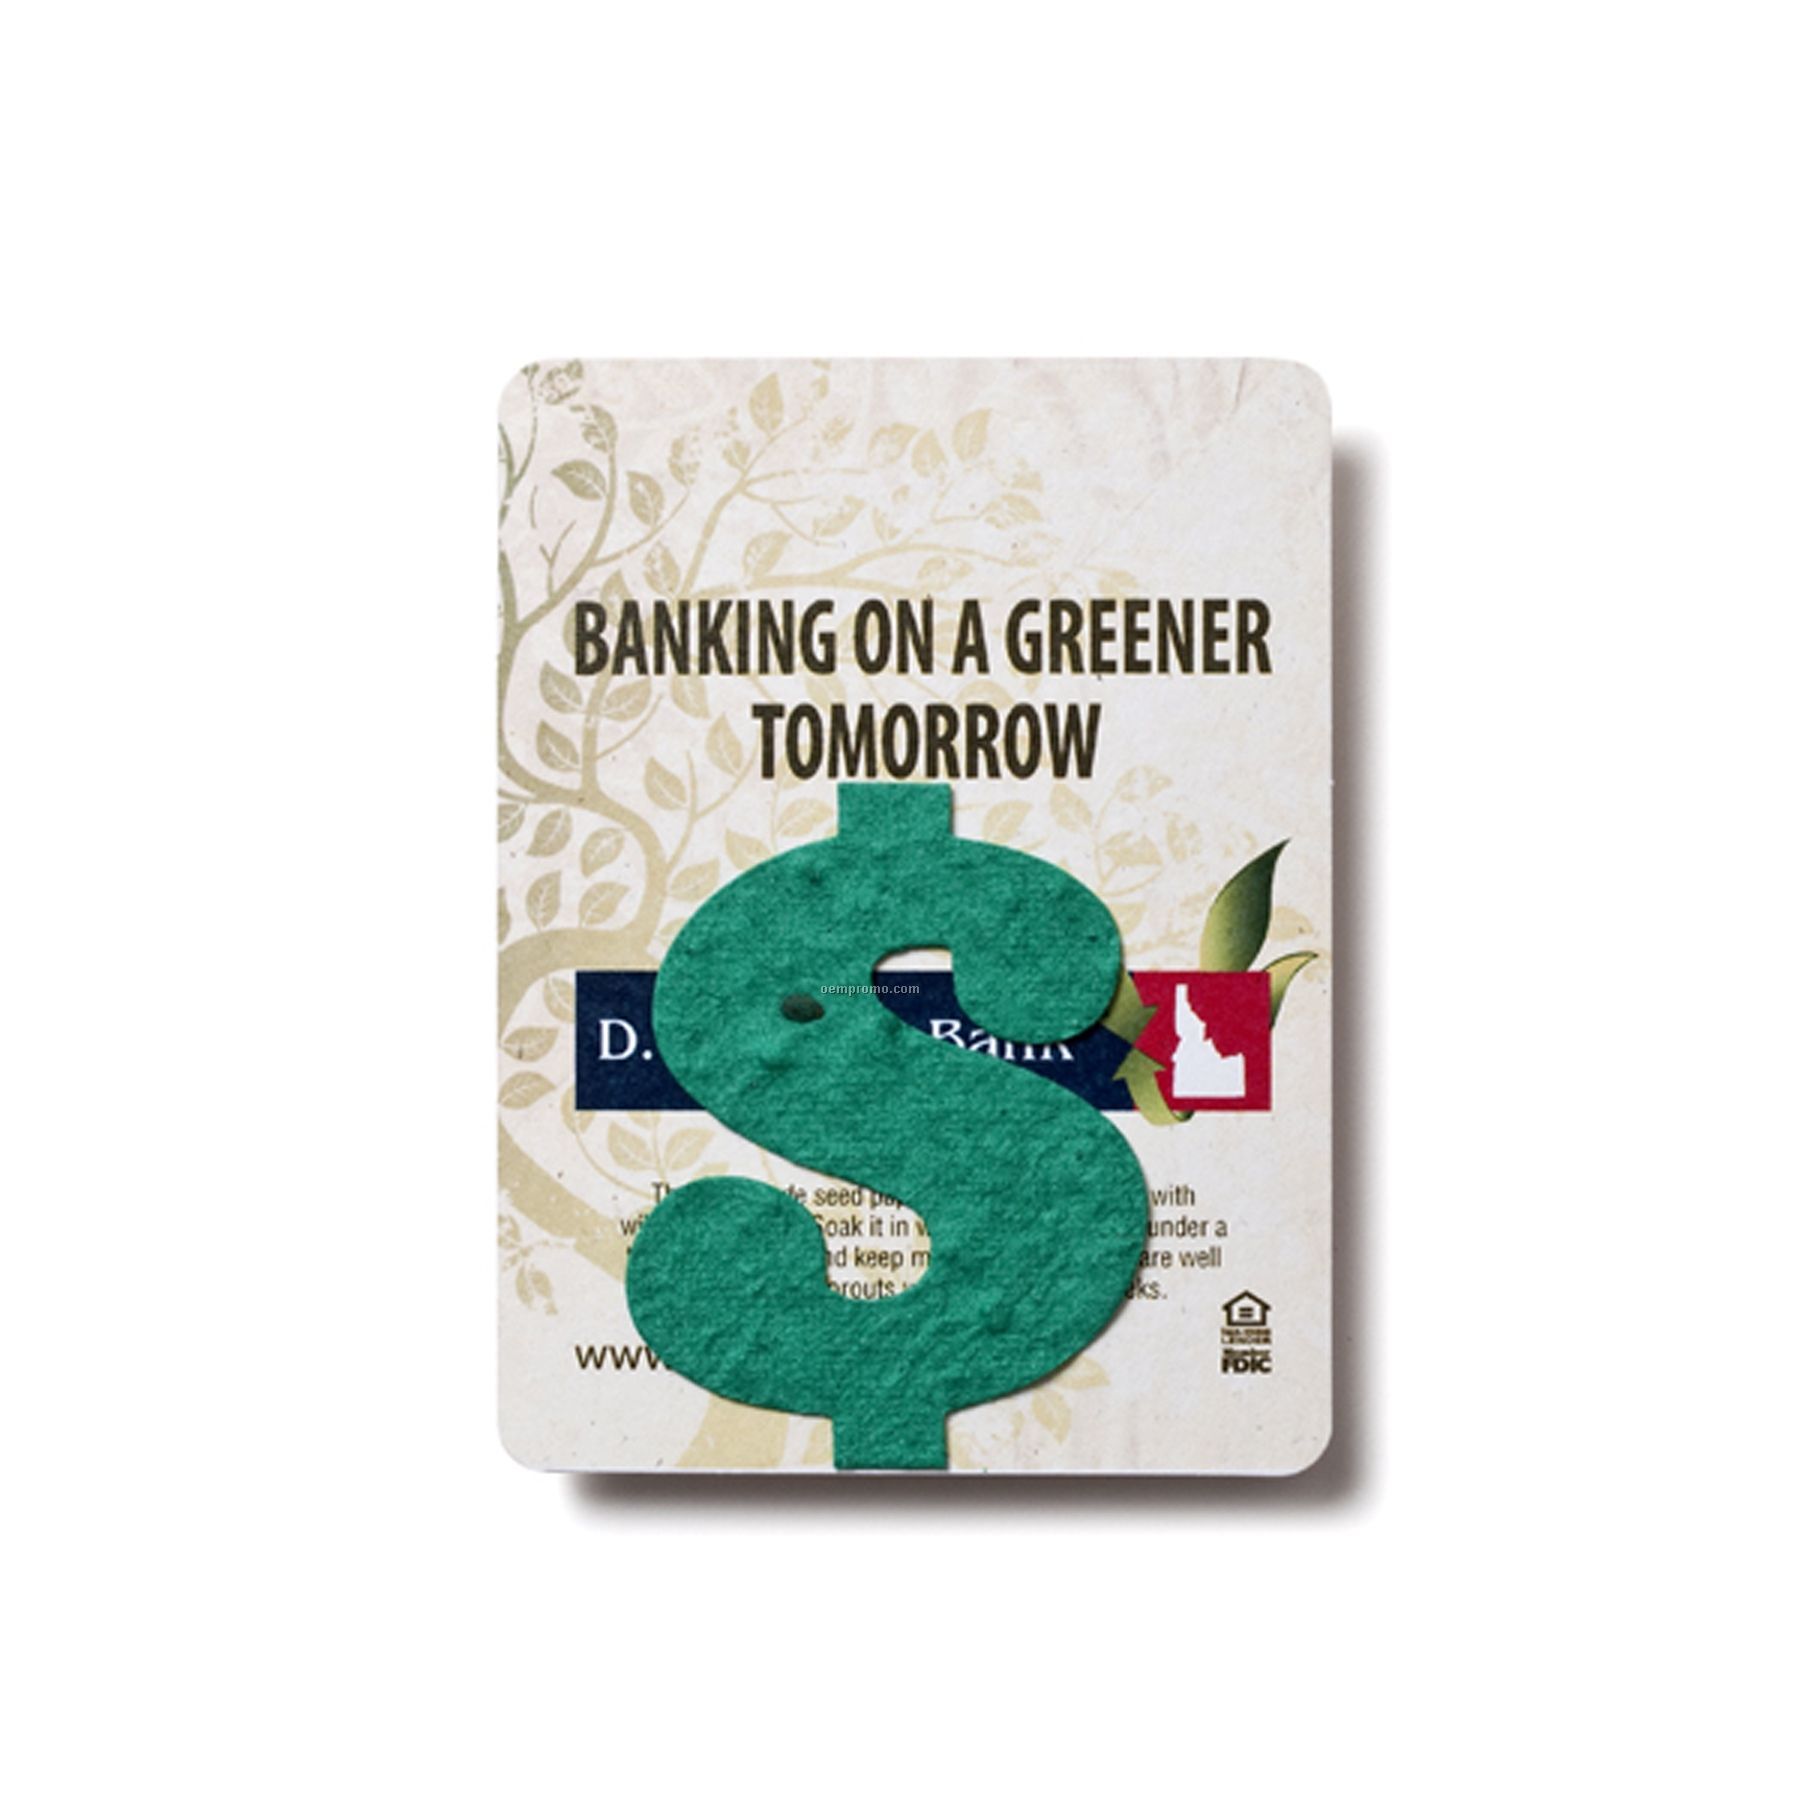 Mini Dollar Sign Seed Paper Gift Pack